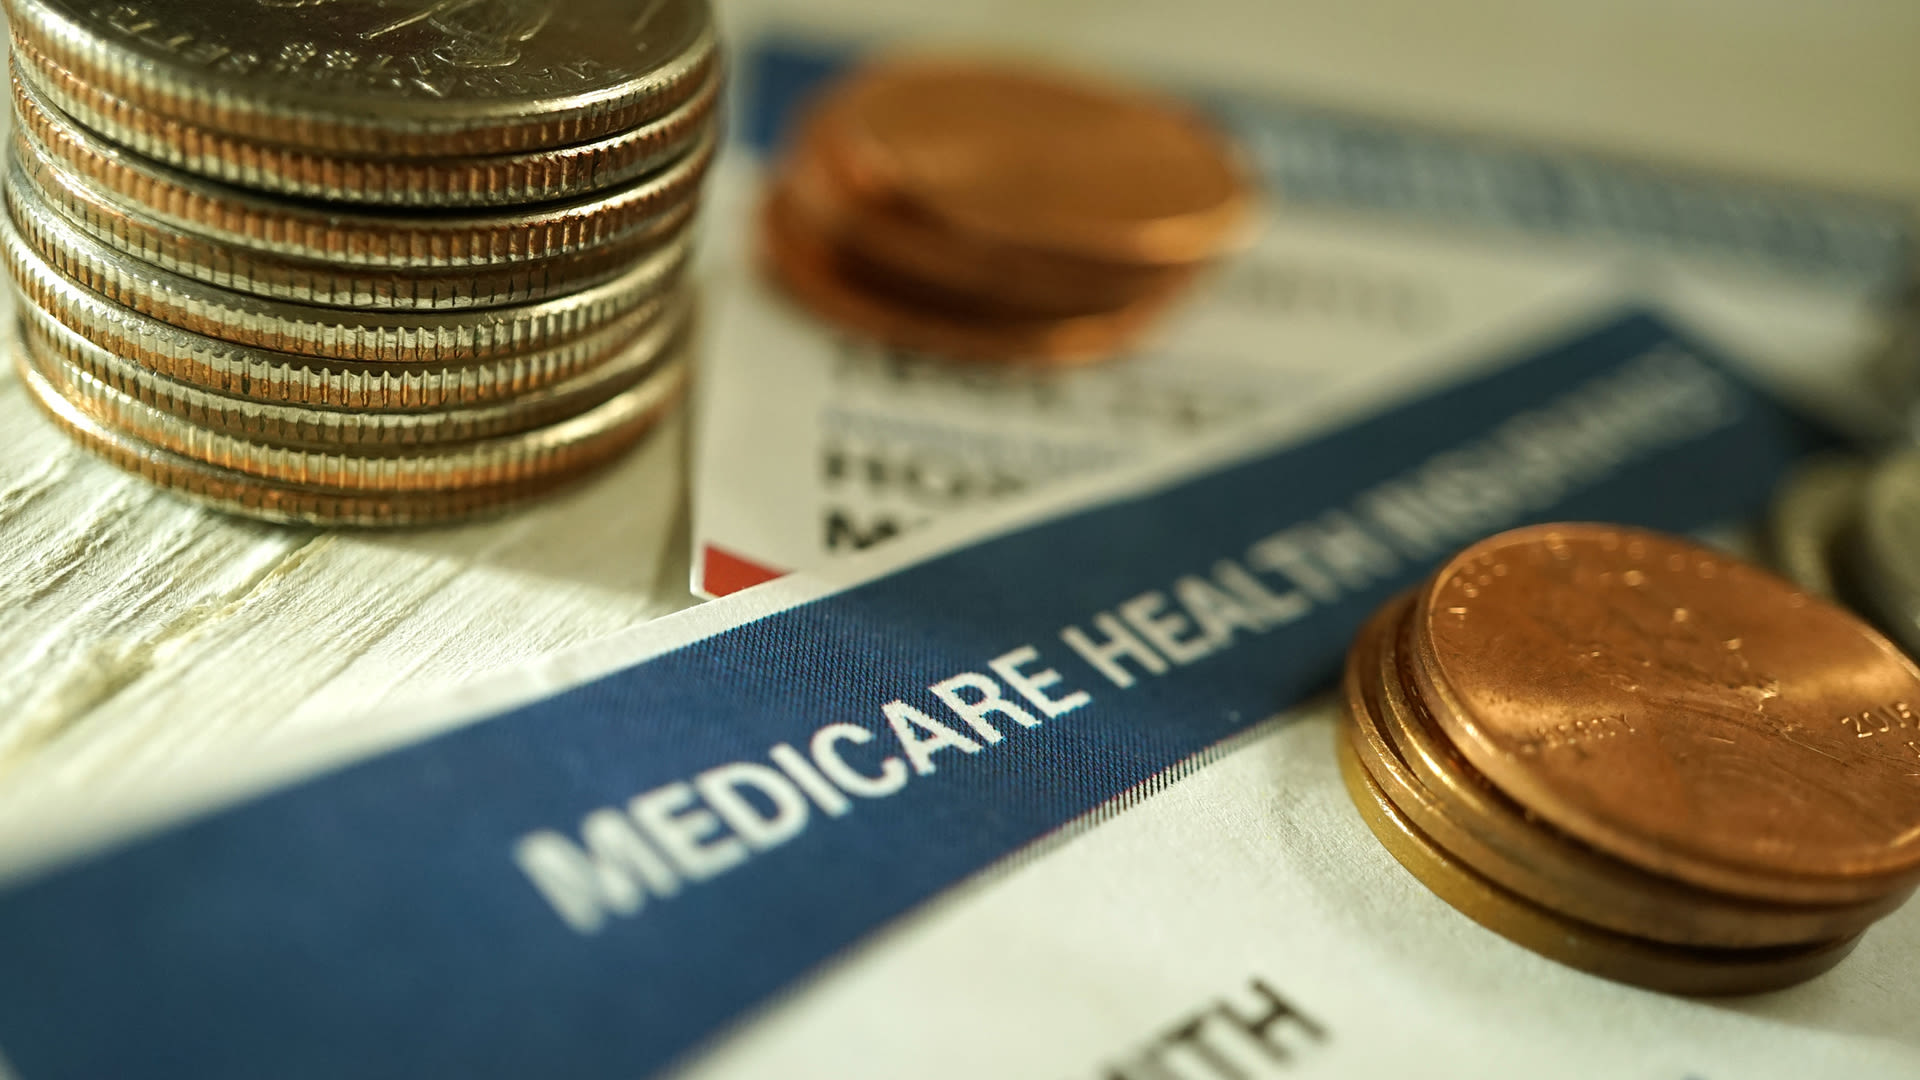 How To Avoid Higher Medicare Costs, According to Suze Orman